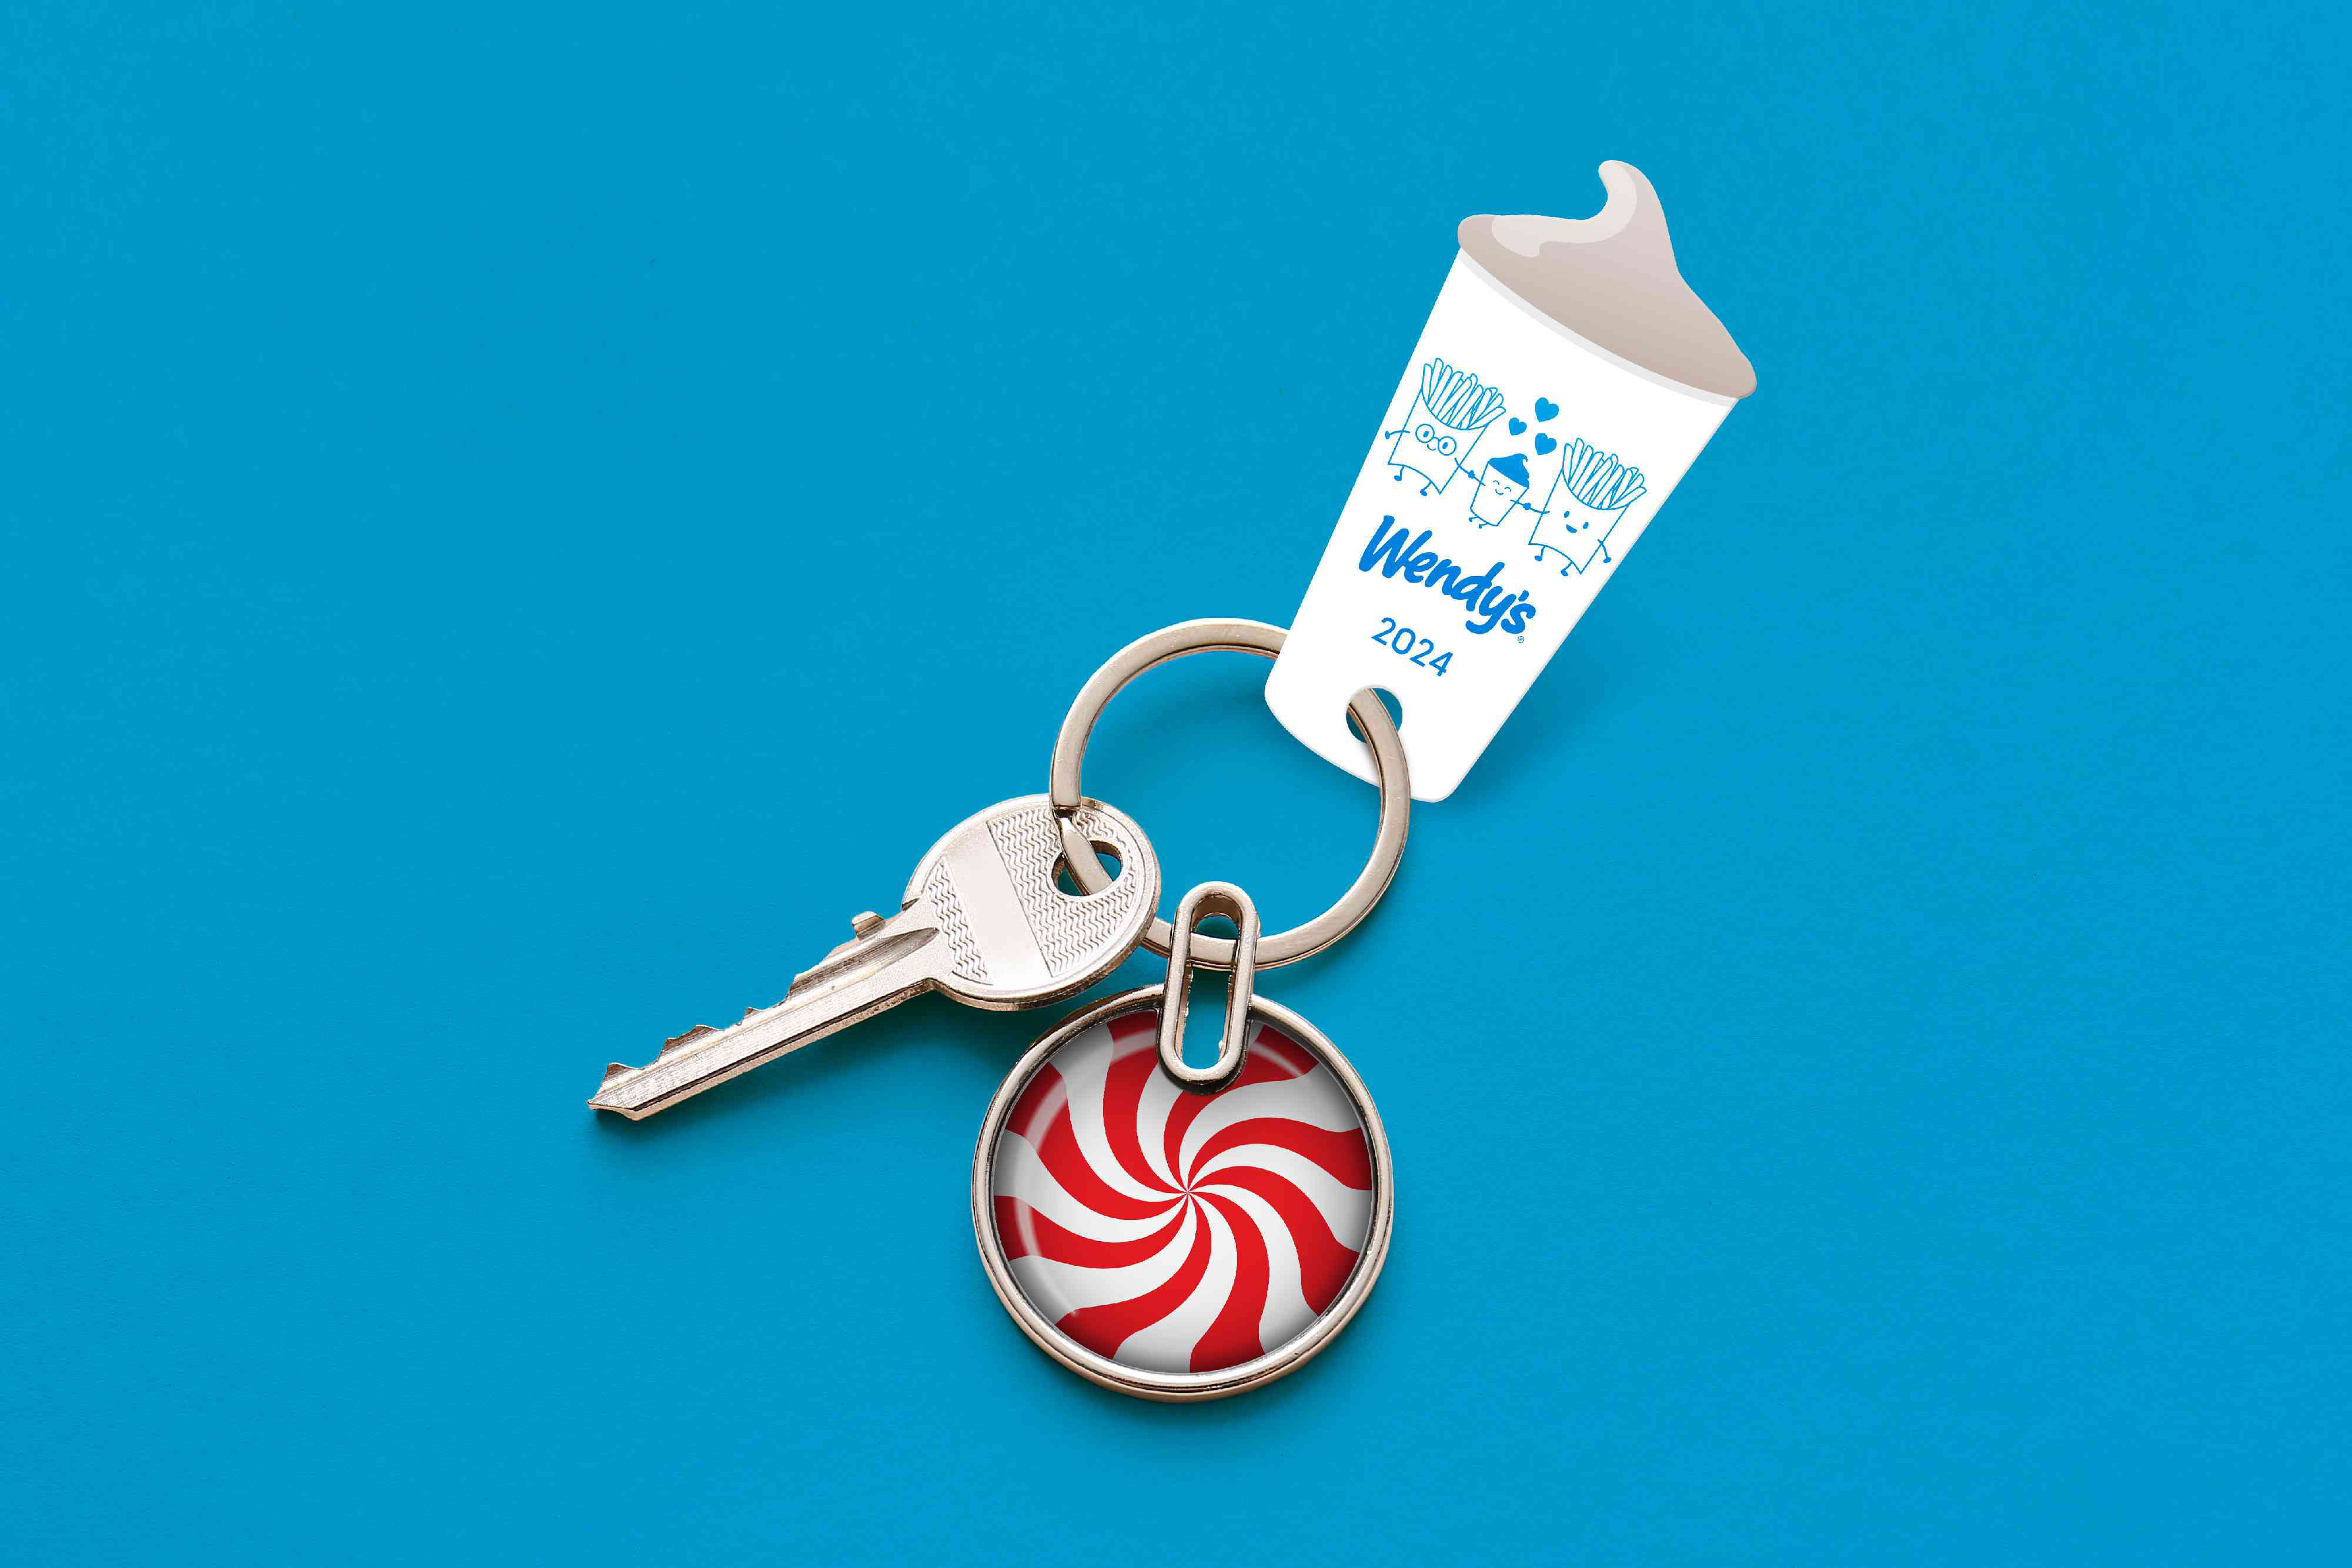 This Wendy's Keychain Gets You Free Frostys for an Entire Year